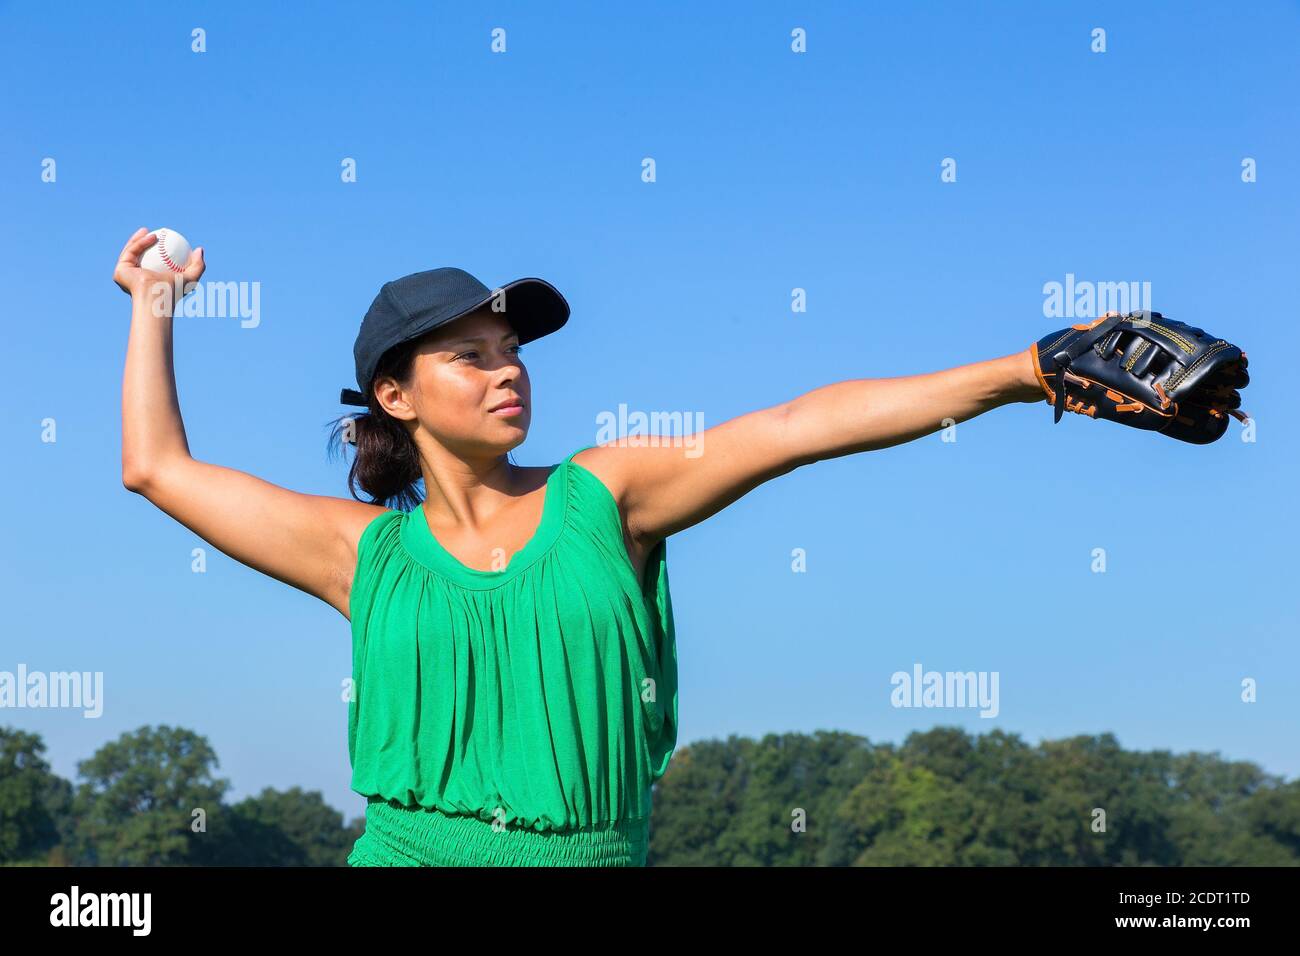 Woman with glove and cap throwing baseball outside Stock Photo